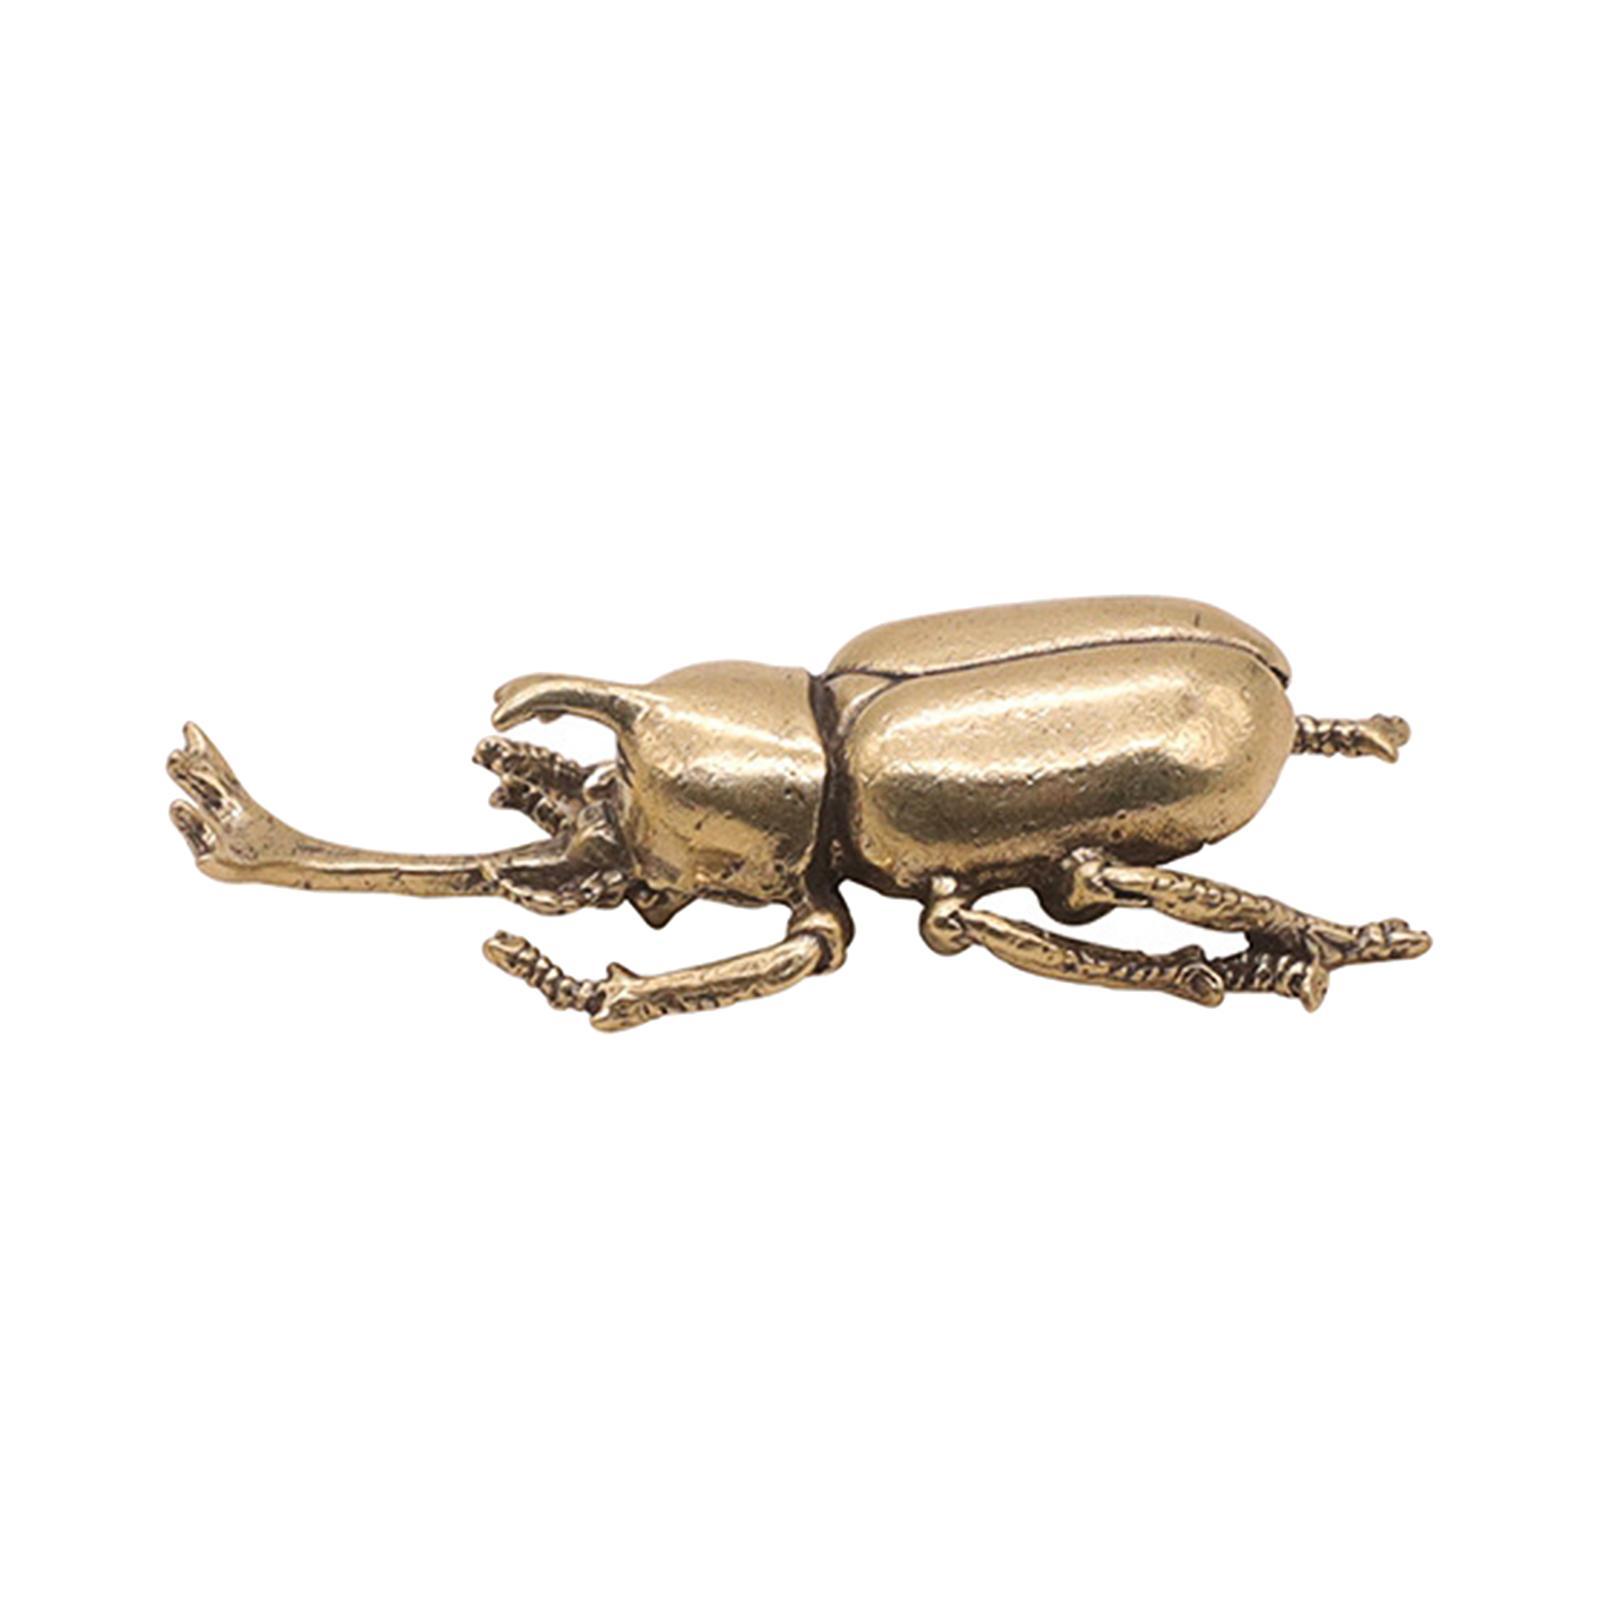 Brass Figurine Statue, Animal Sculpture Artwork Crafts Ornament, for Office Table Home Decor Gift